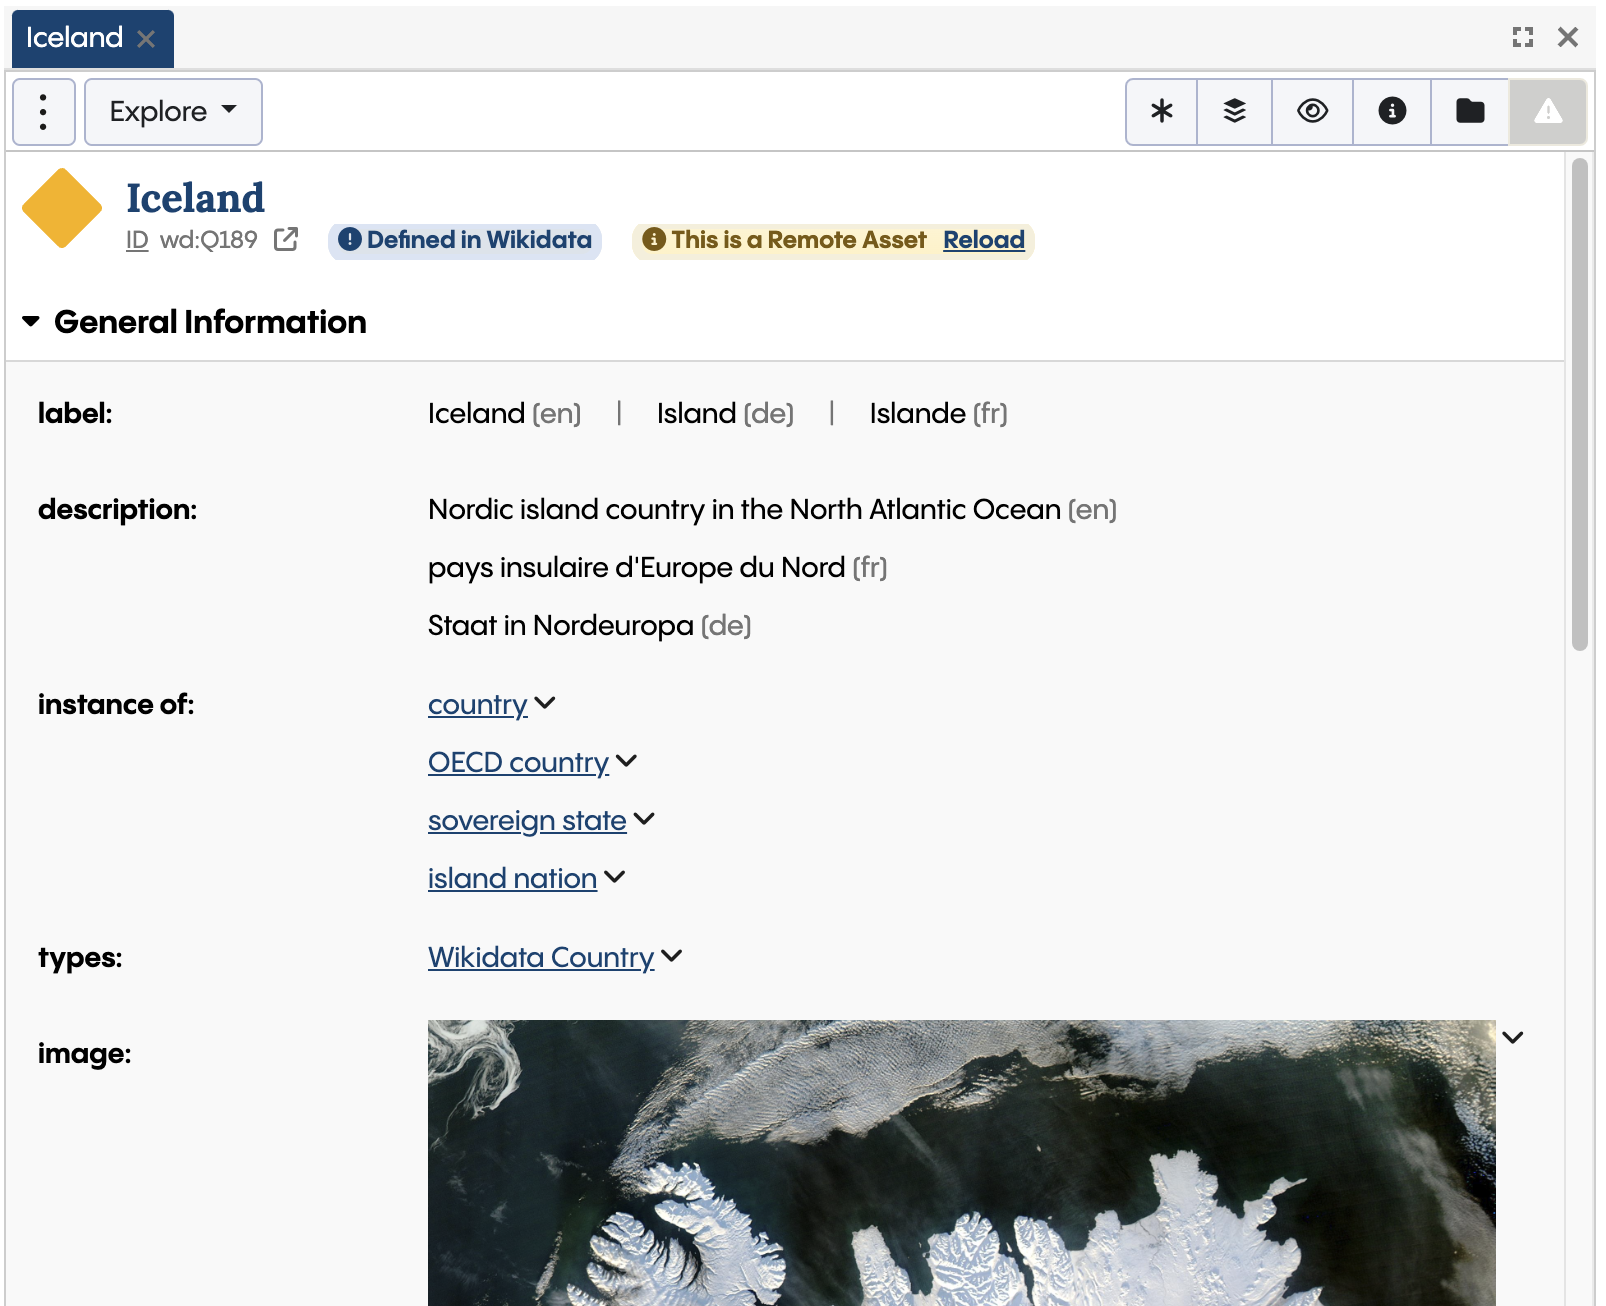 TopBraid EDG screenshot showing the details of the Wikidata country Iceland